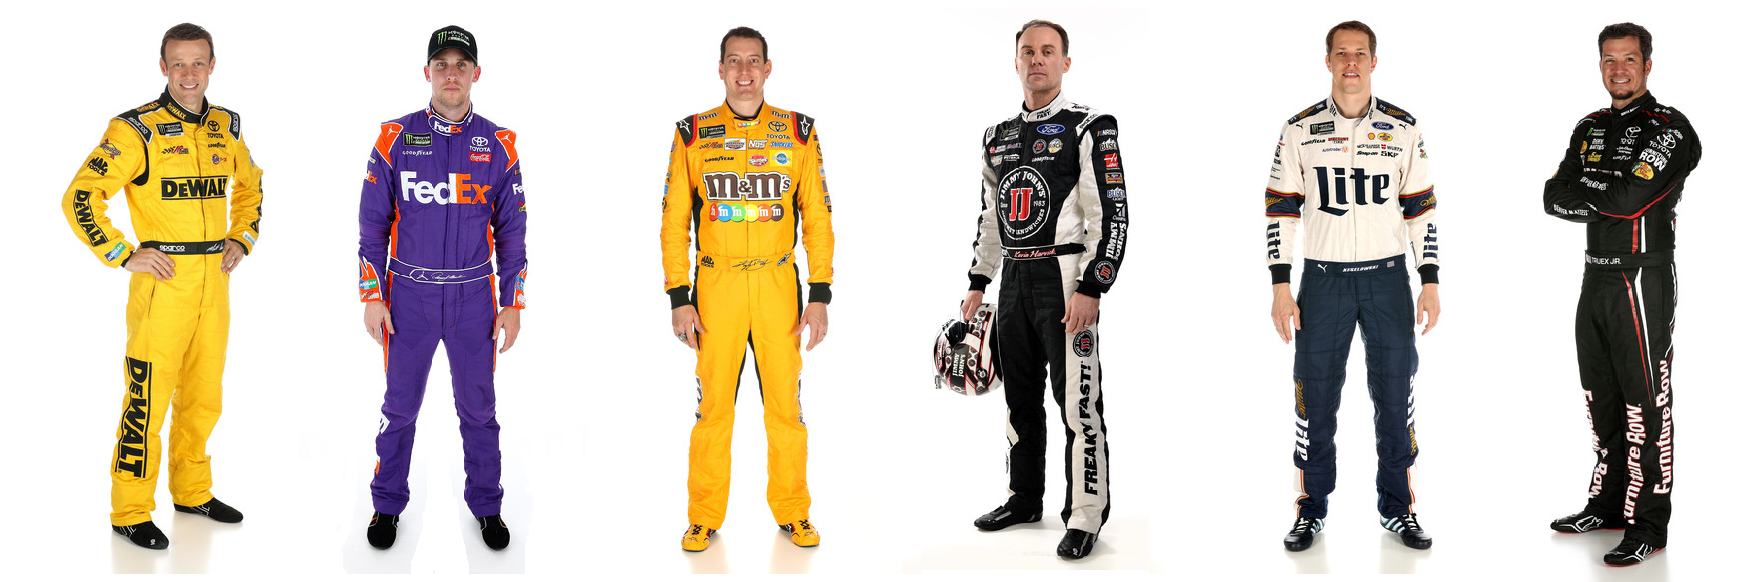 Which of these six will have a wicked good time at NHMS?